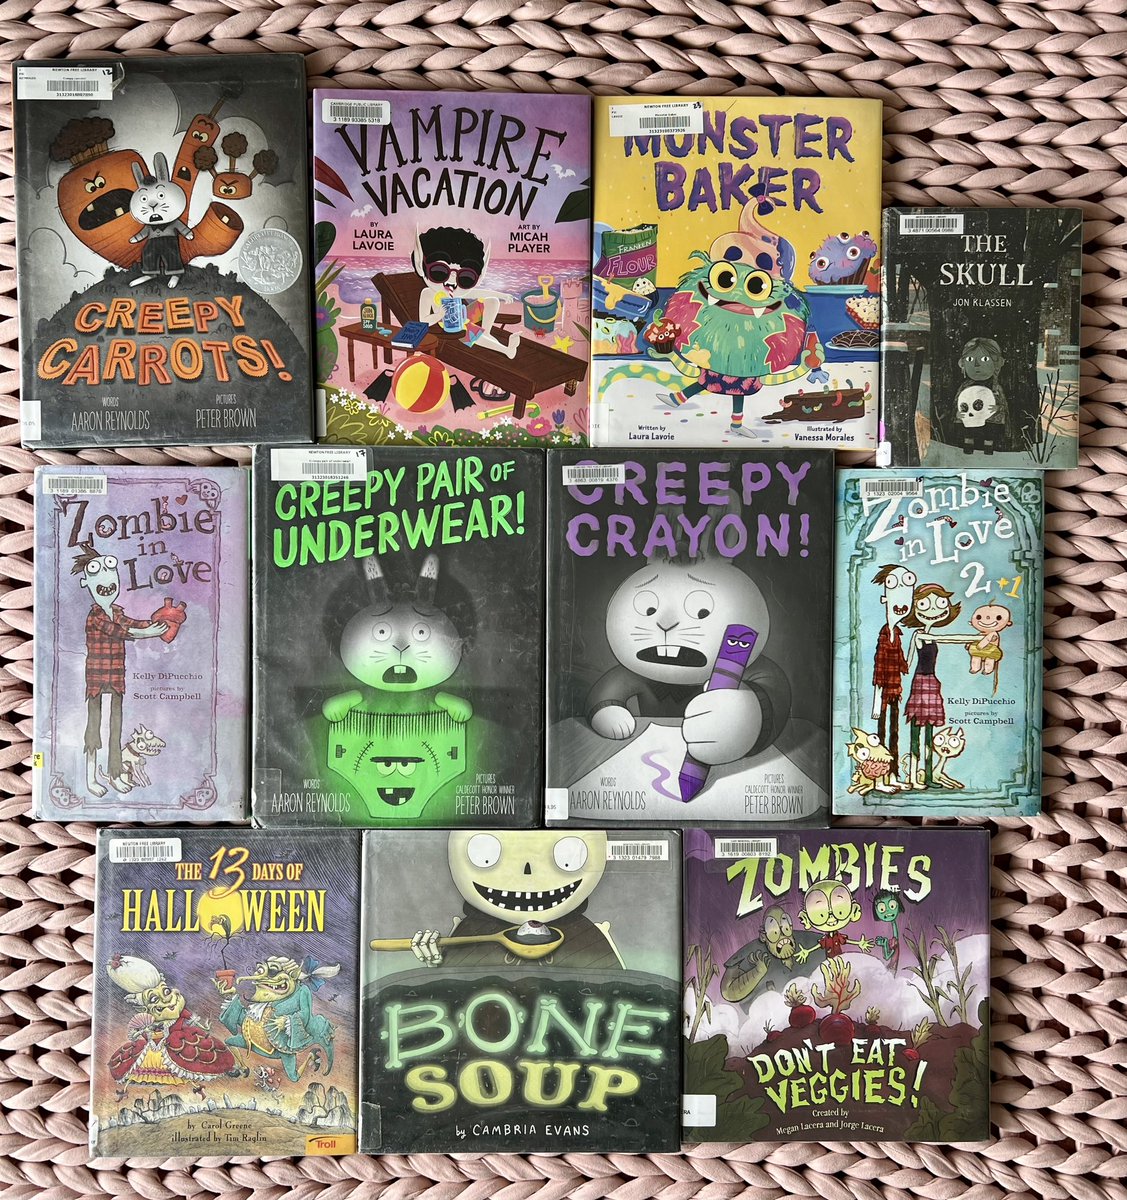 My library book haul is spooked! 😱 What scary stories did you love as a kid? #librarylove #bookhaul #WritingCommmunity #kidlit #spooky #reading